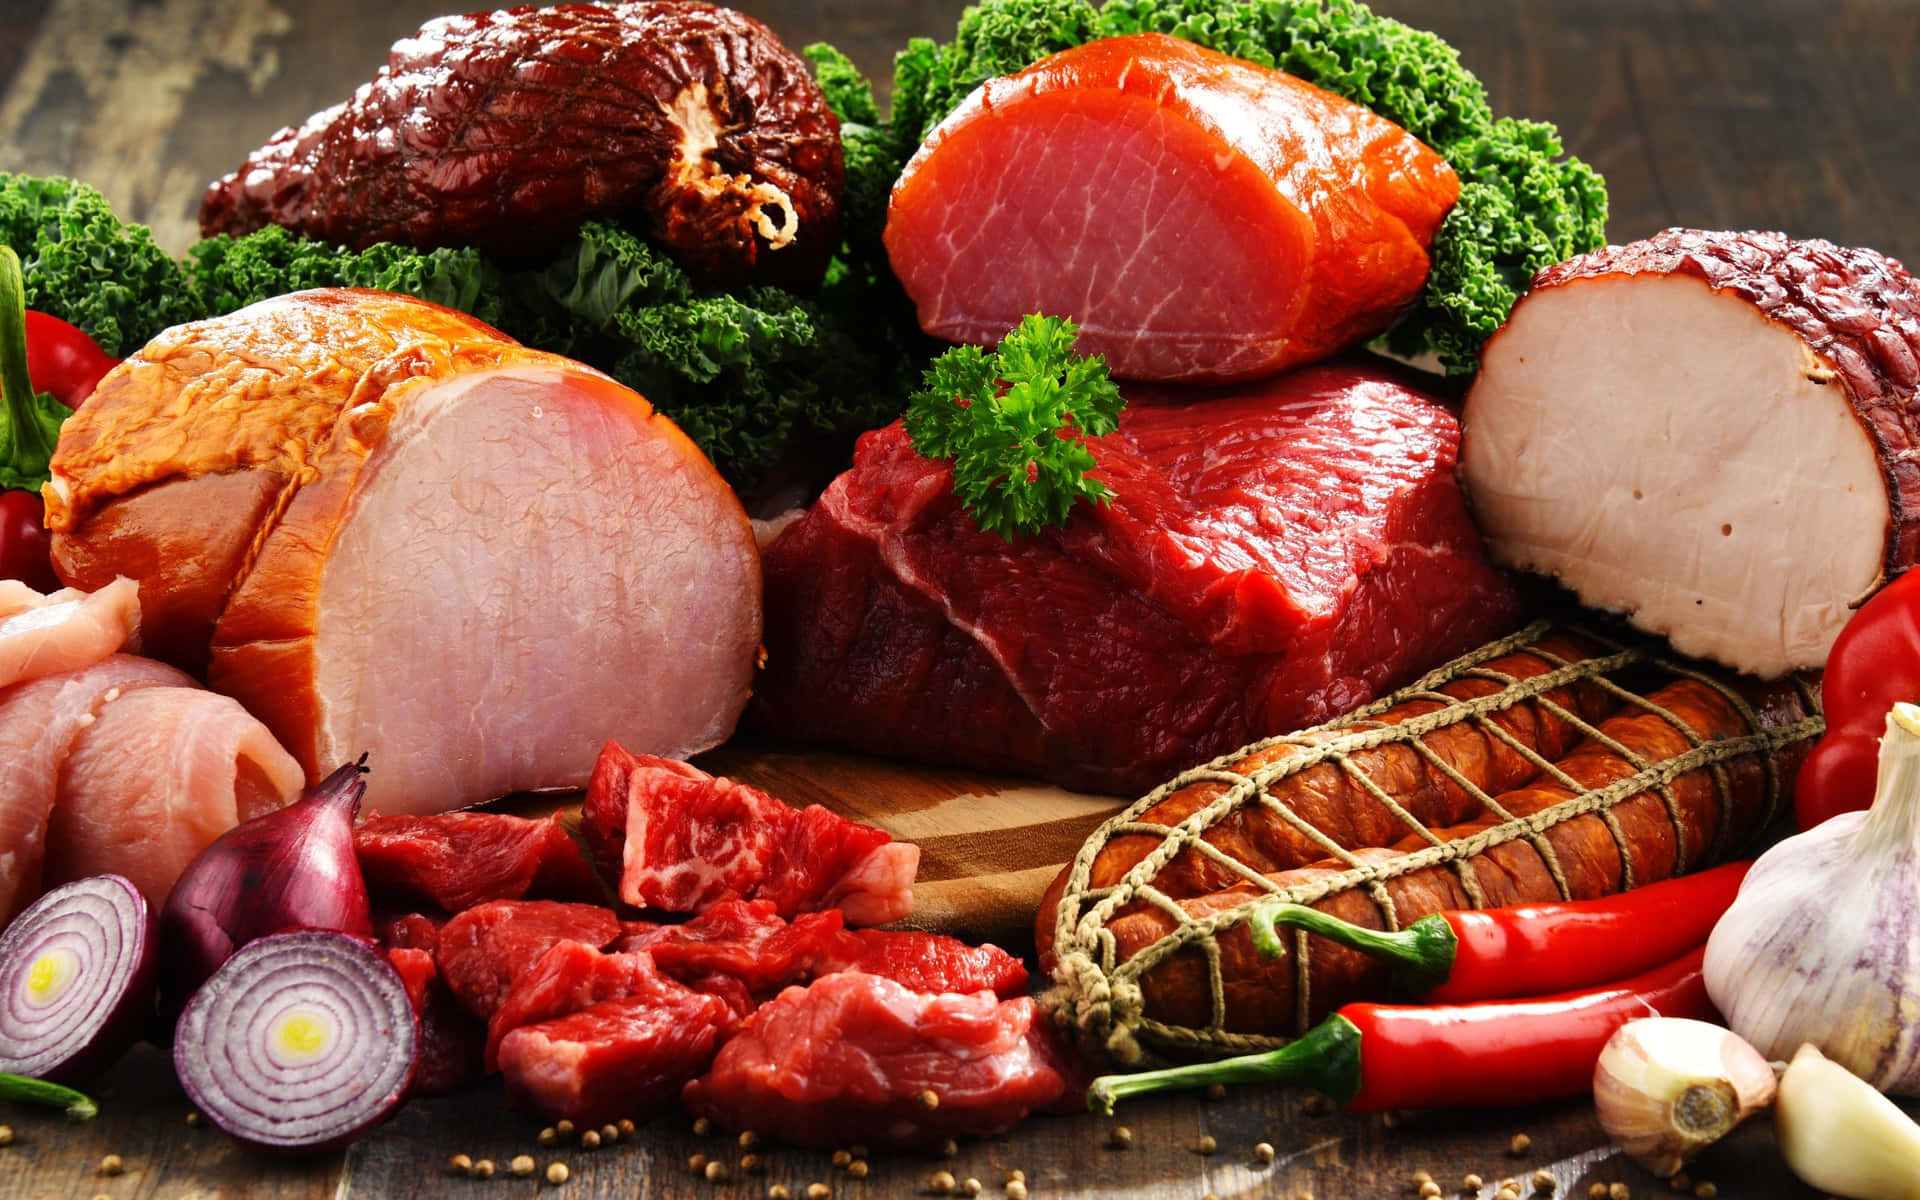 Juicy and Delicious Red Meat on a Wooden Board Wallpaper